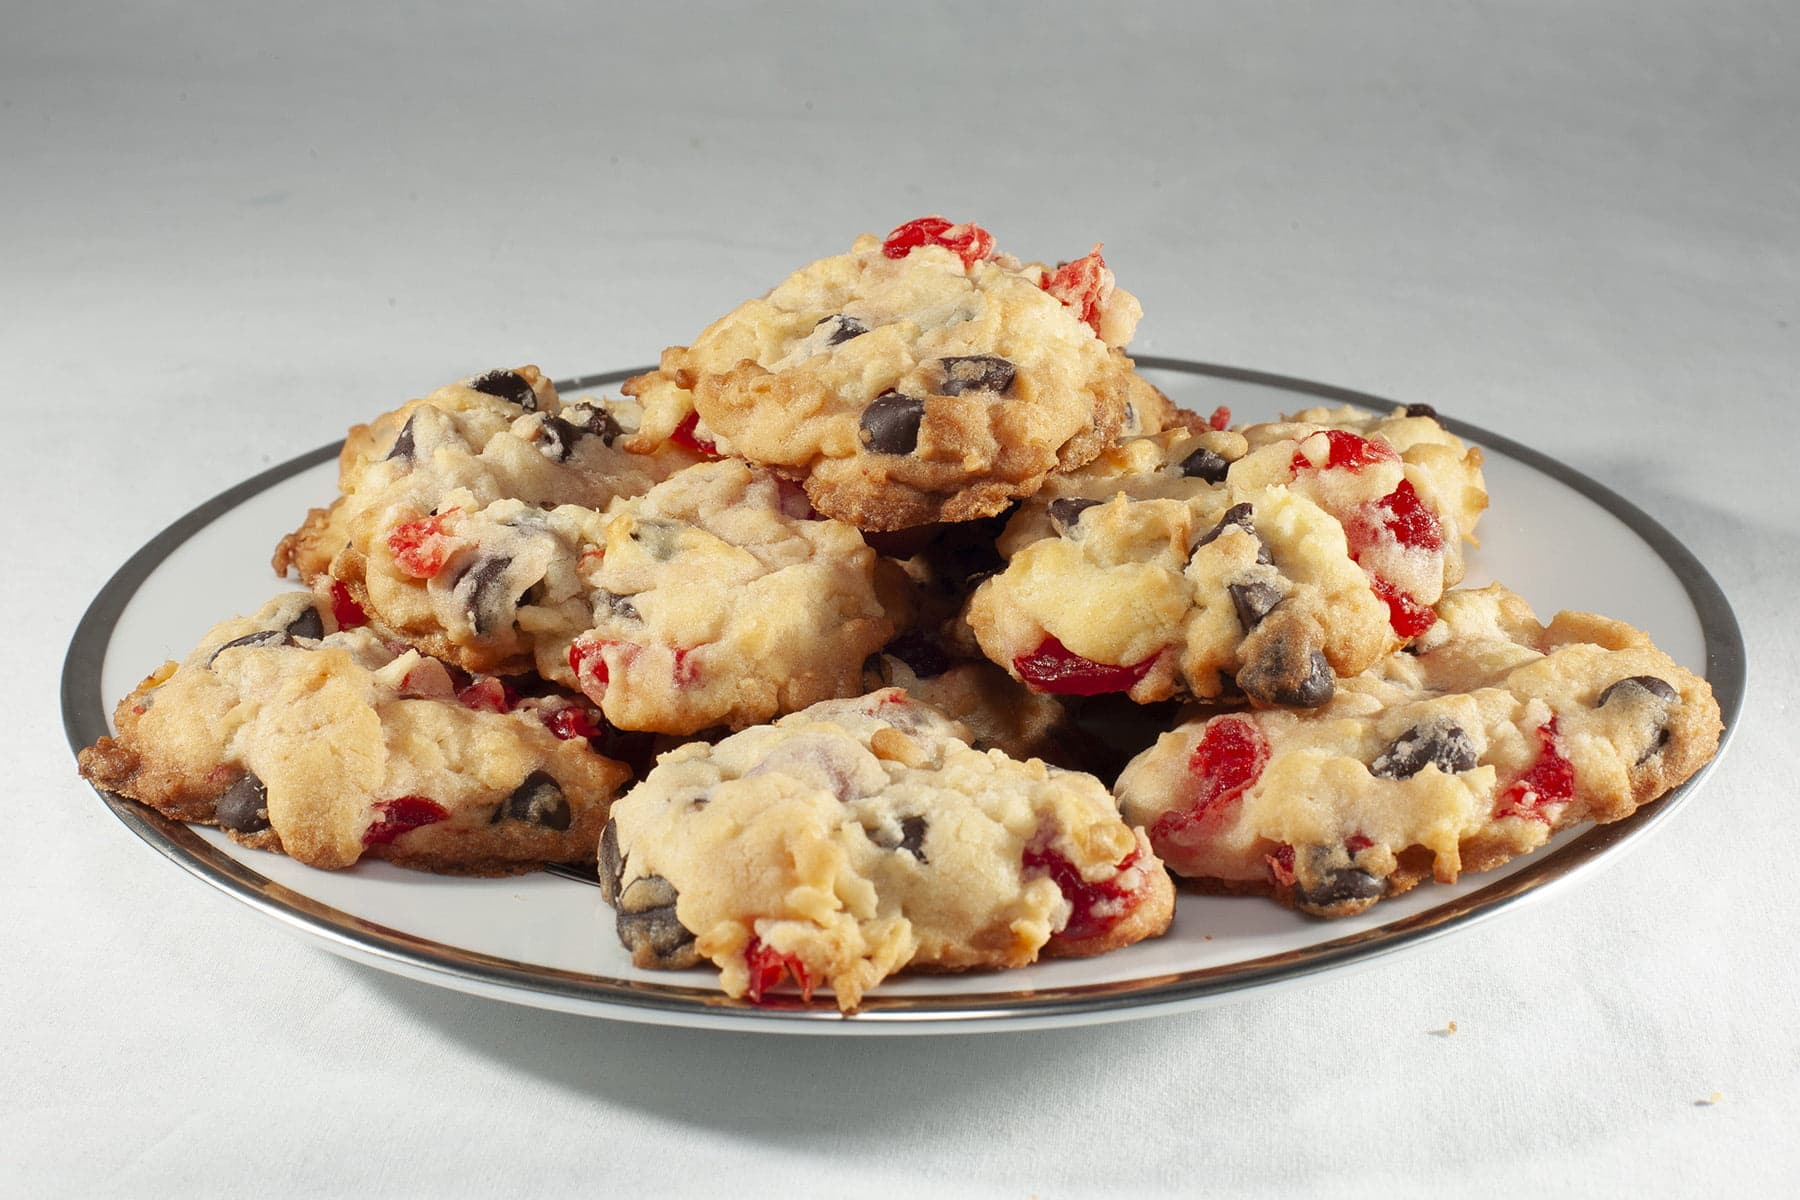 A plate of "Noelles" cookies - Lighty coloured drop cookies, with chocolate chips and pieces of maraschino cherries visible.